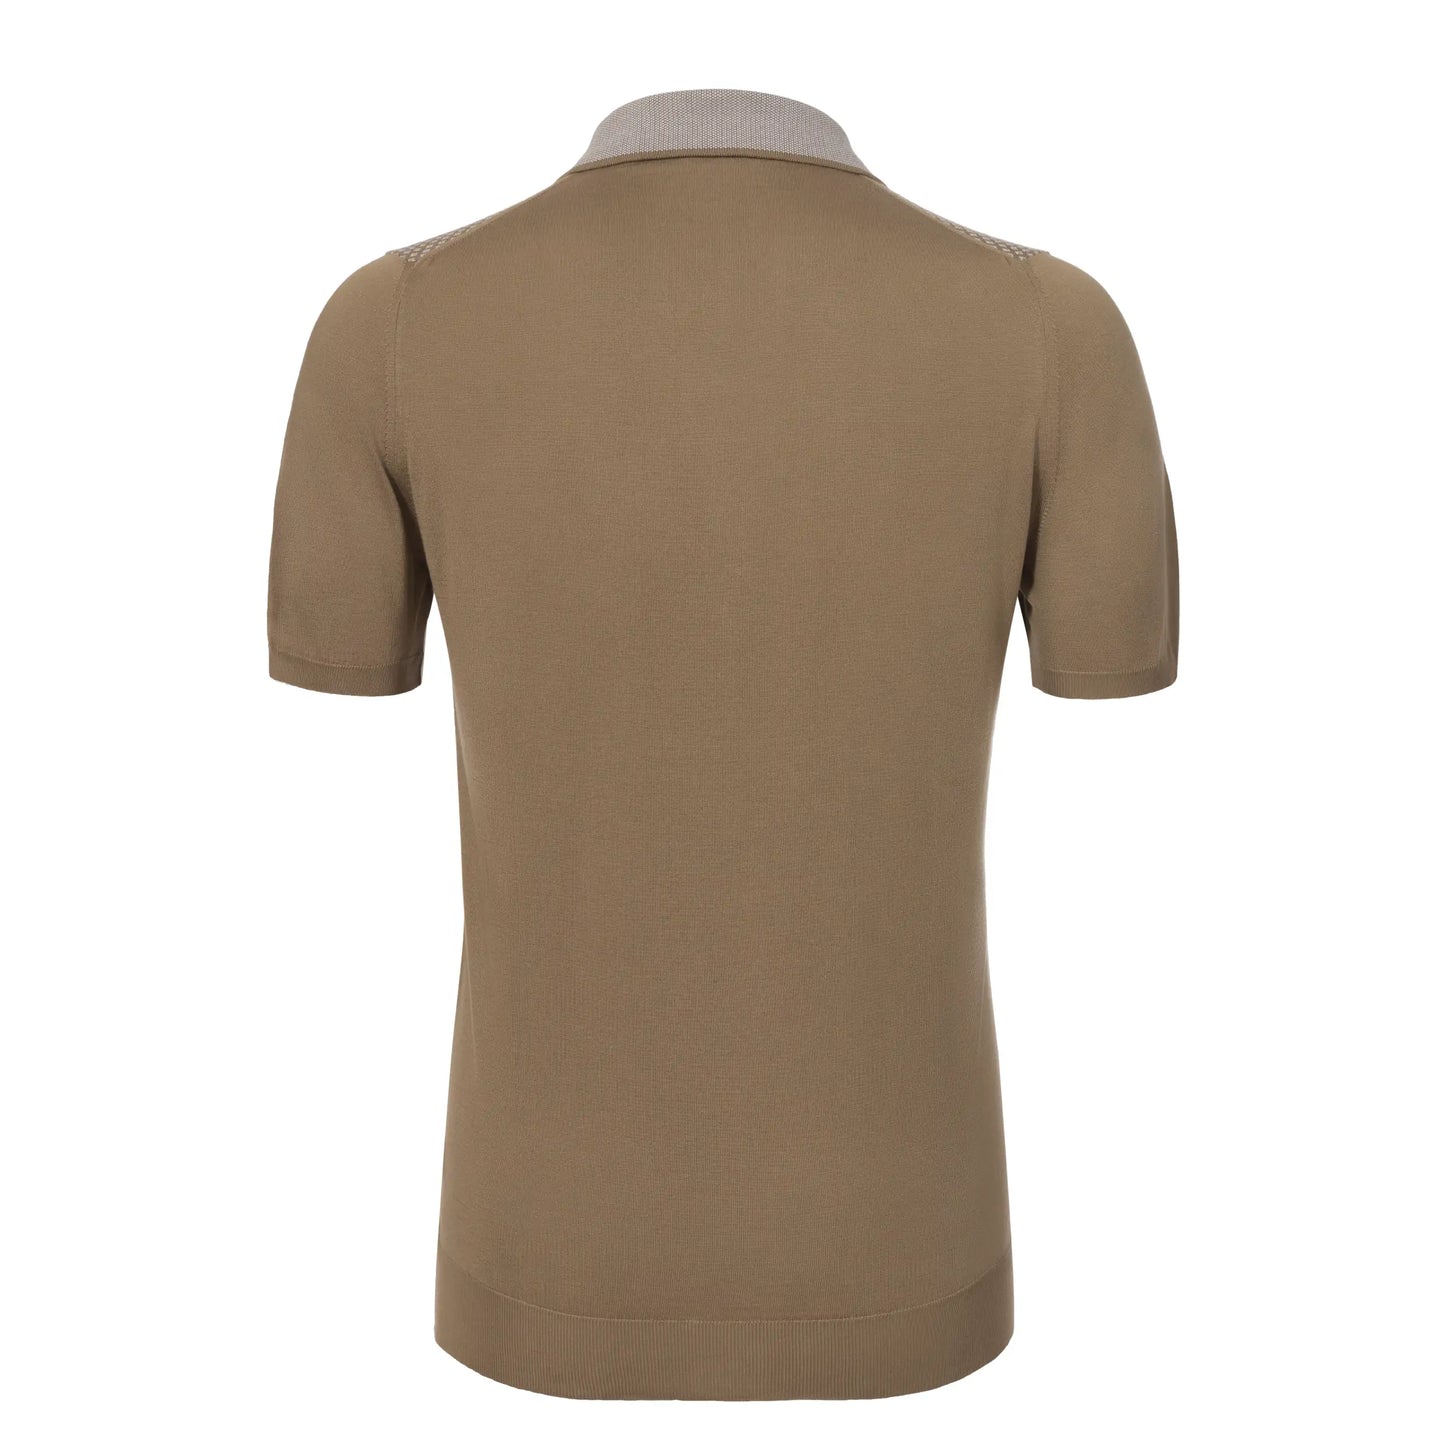 All-Monogram Polo Shirt in Sand Brown